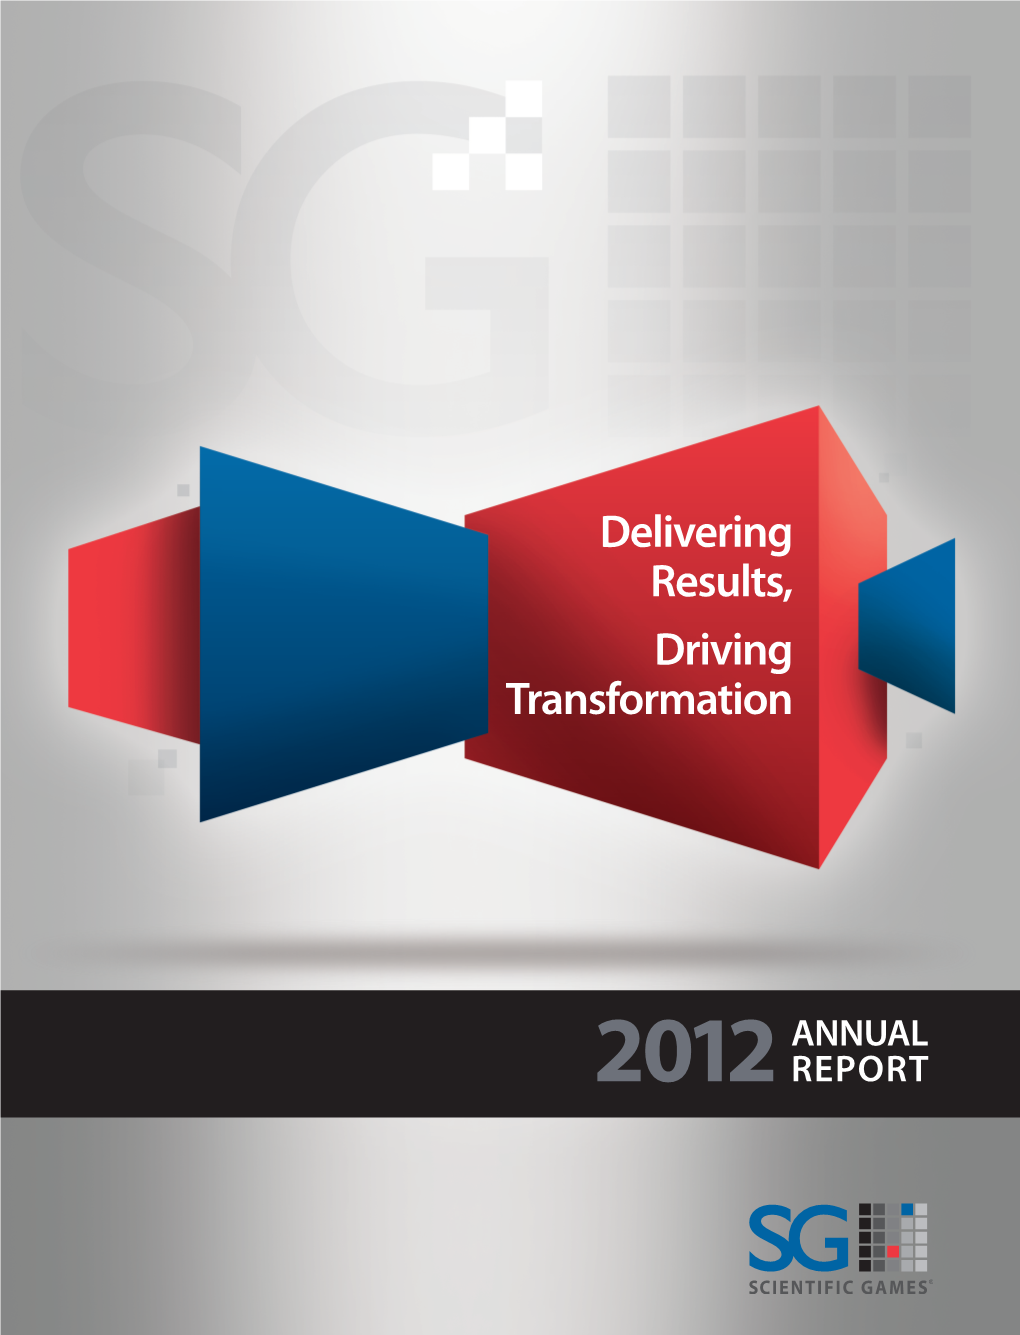 View Annual Report